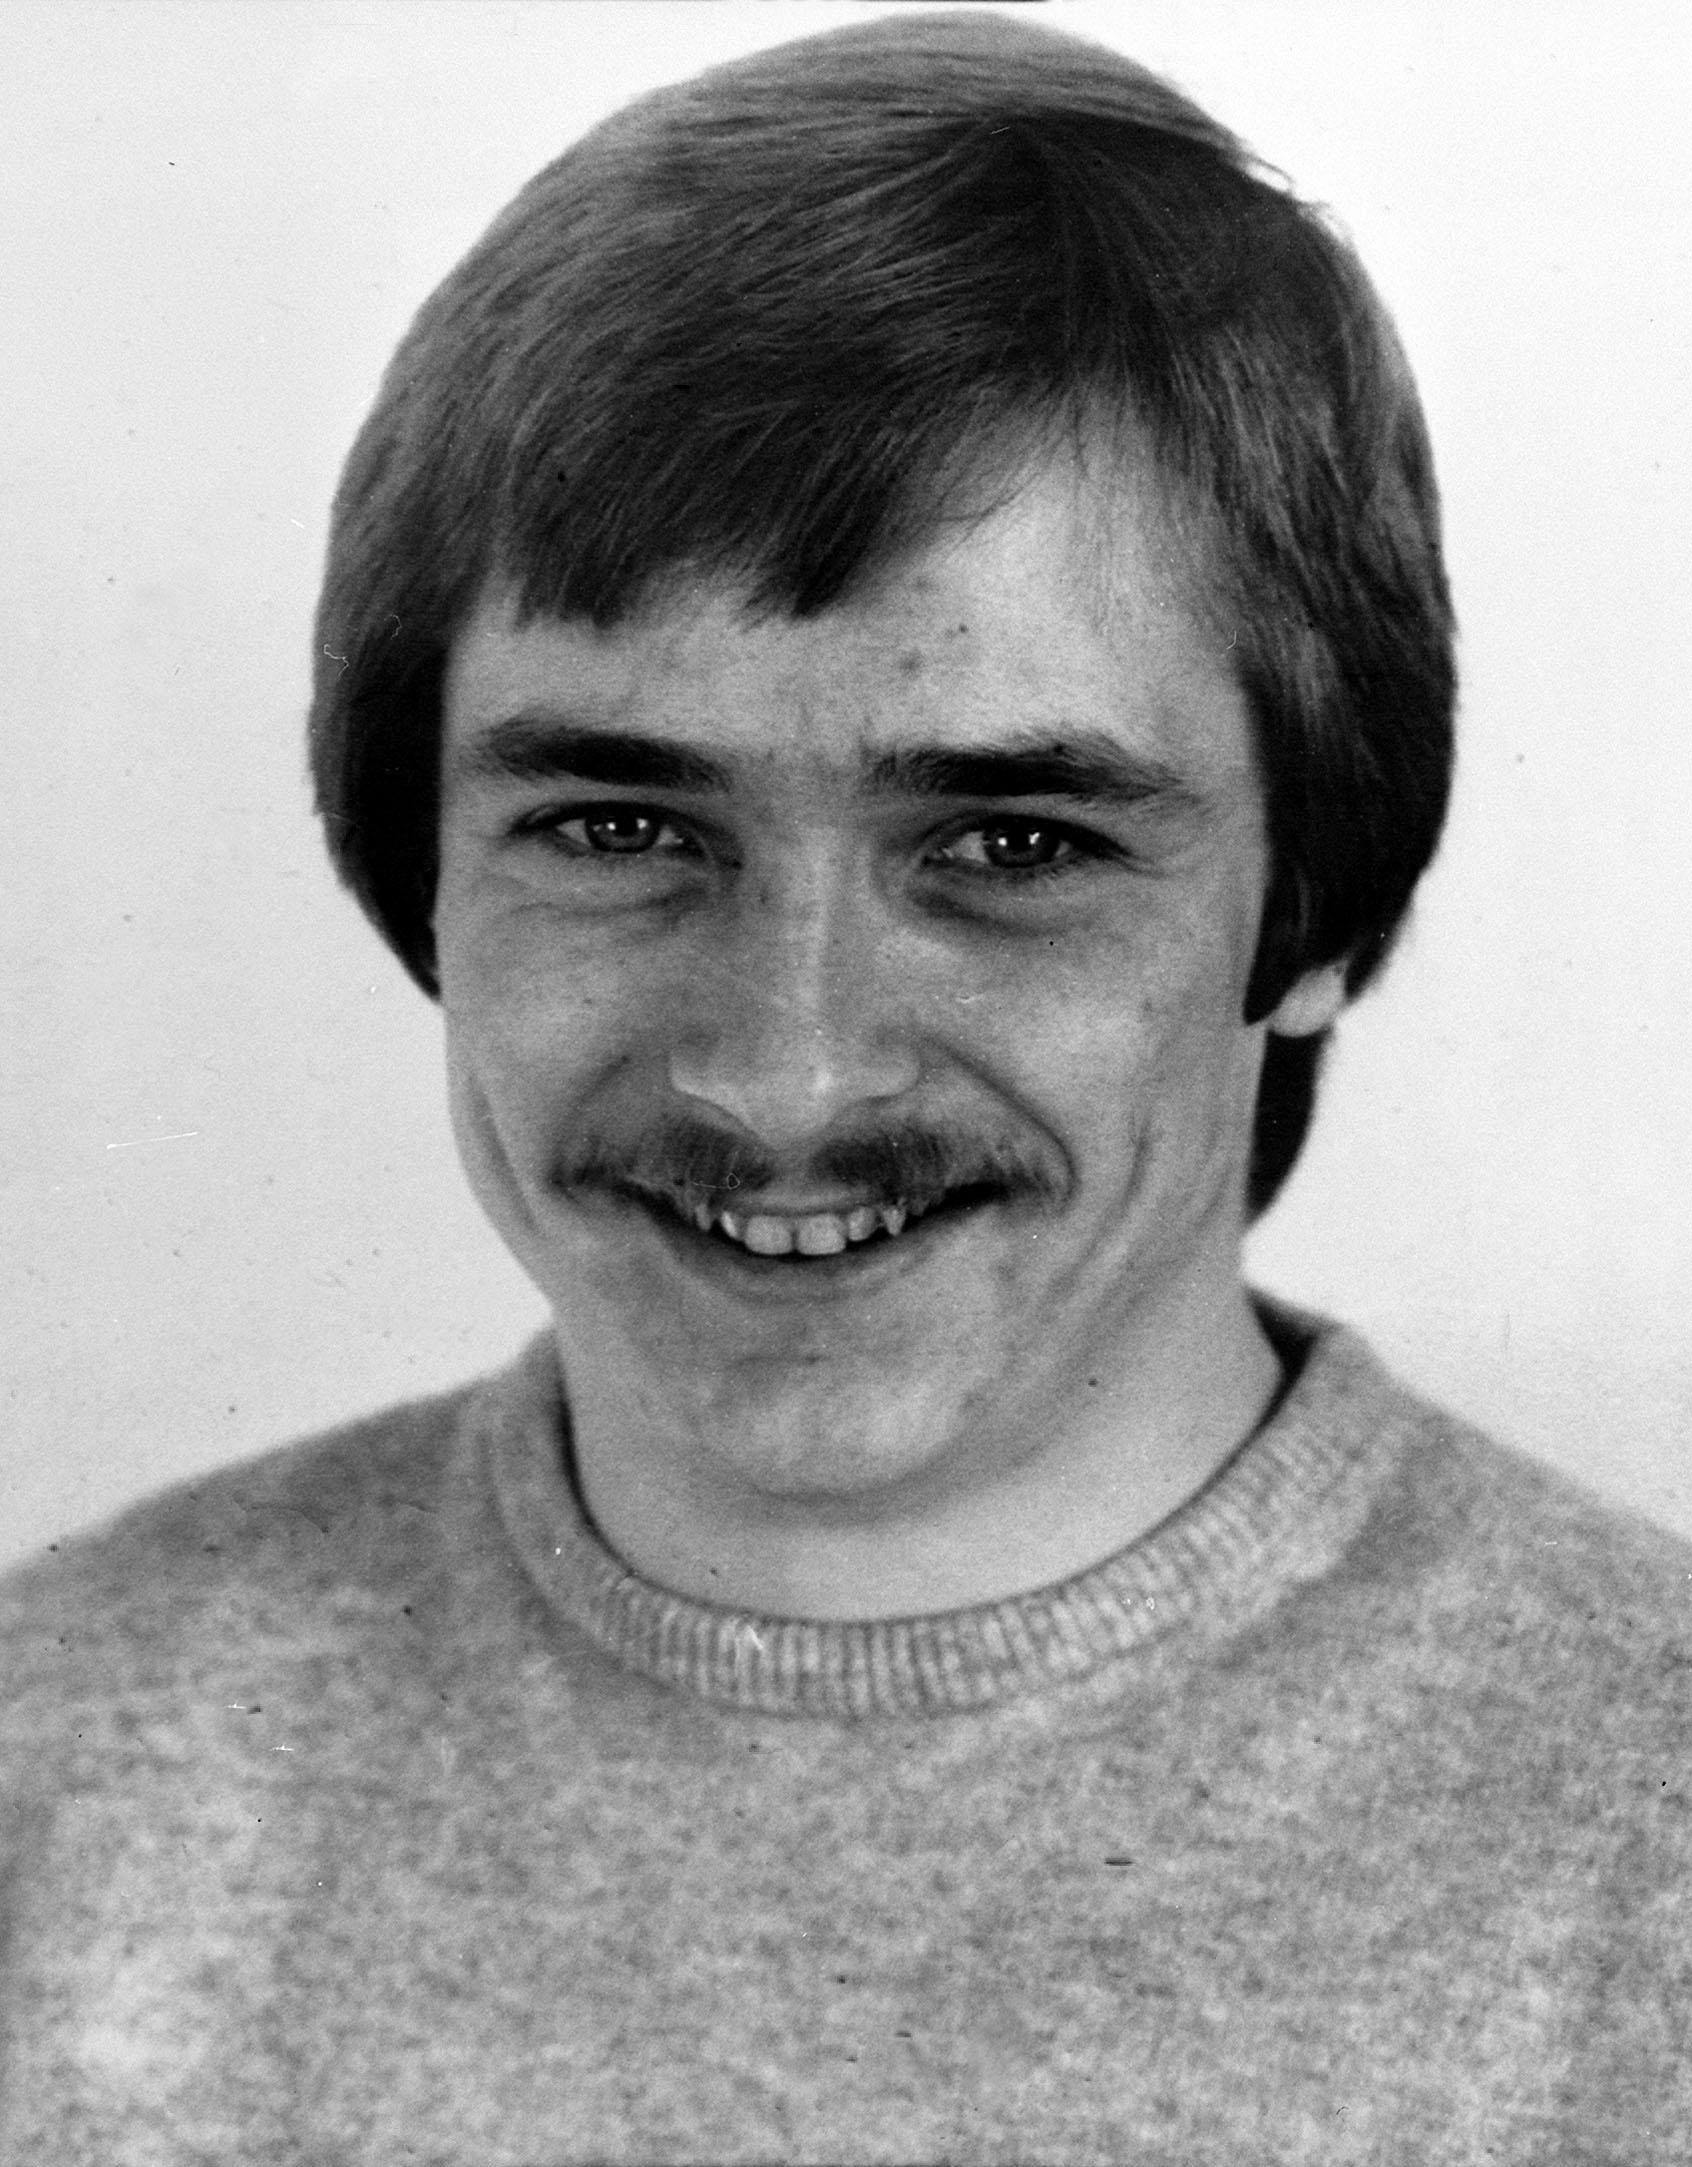 Russell Bishop in the late 1980s